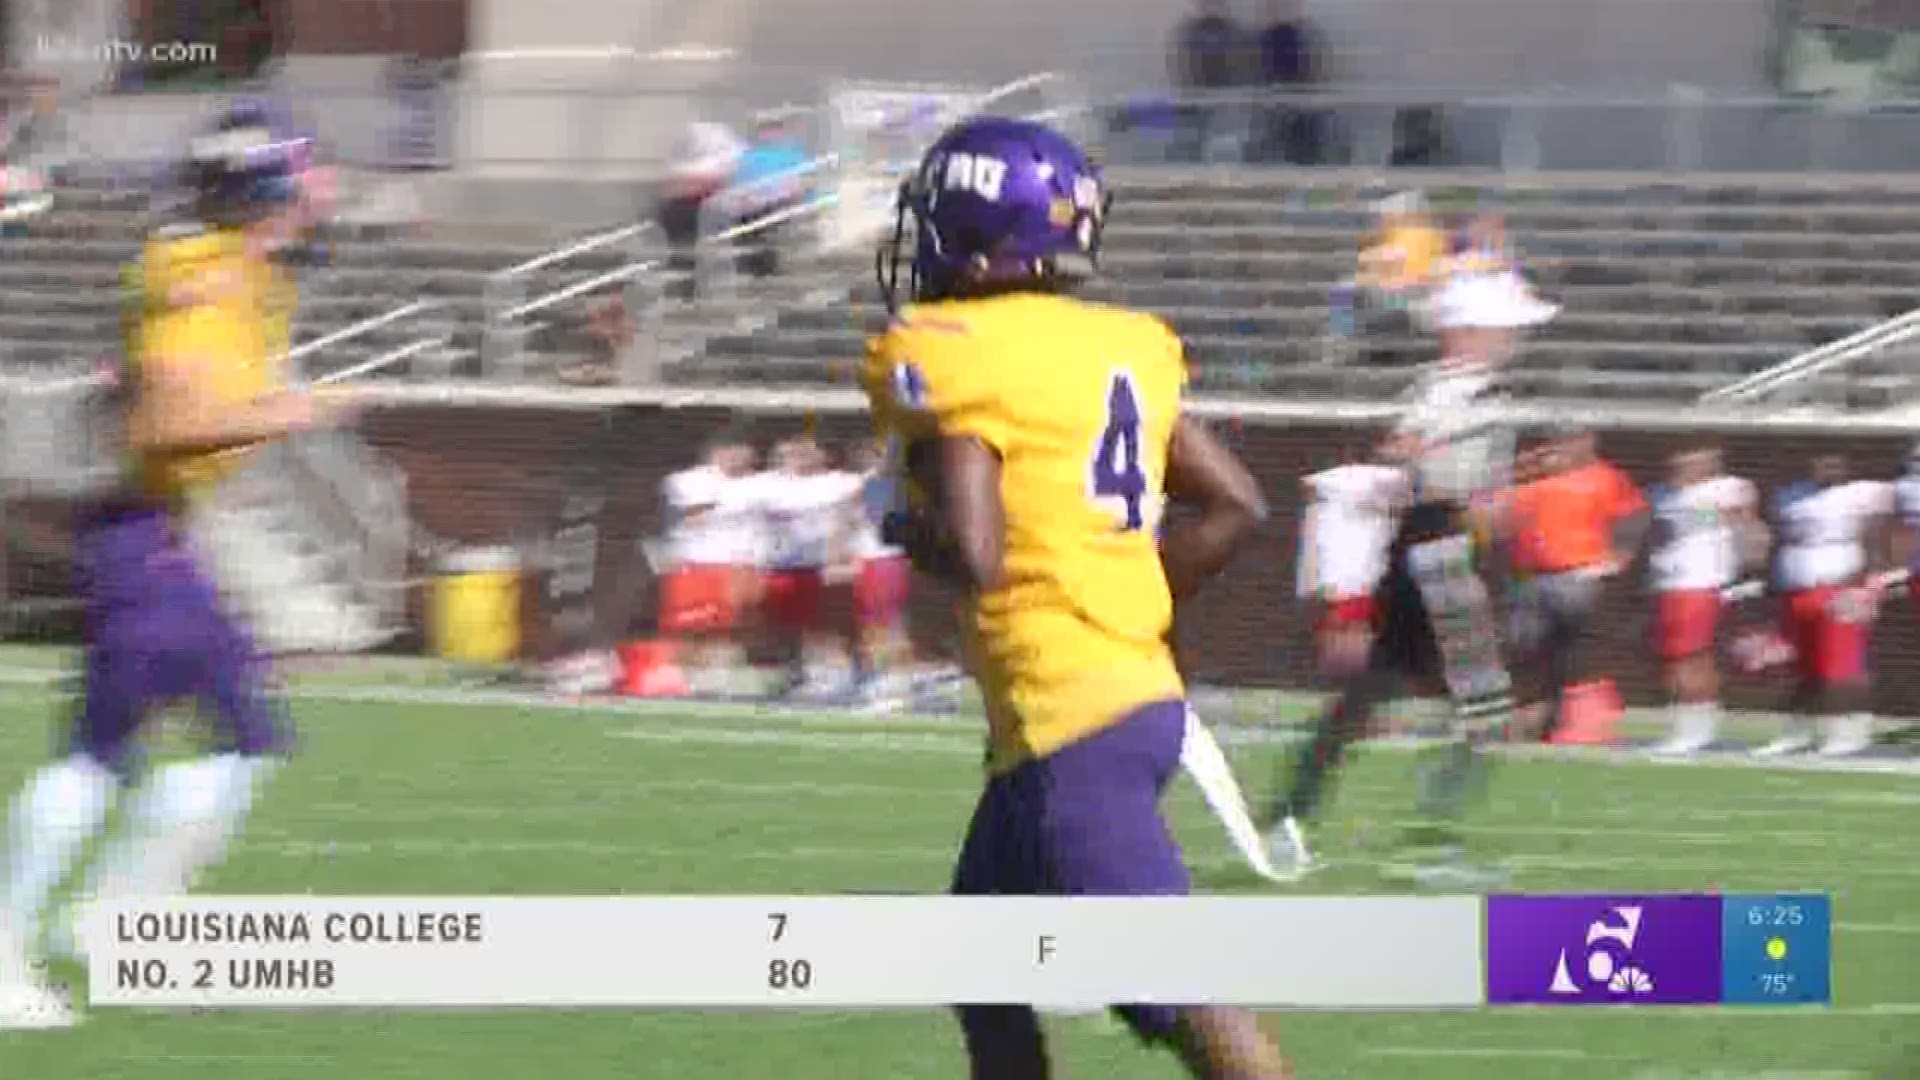 UMHB put up their second straight 80-point game Saturday with an 80-7 win over Louisiana College.